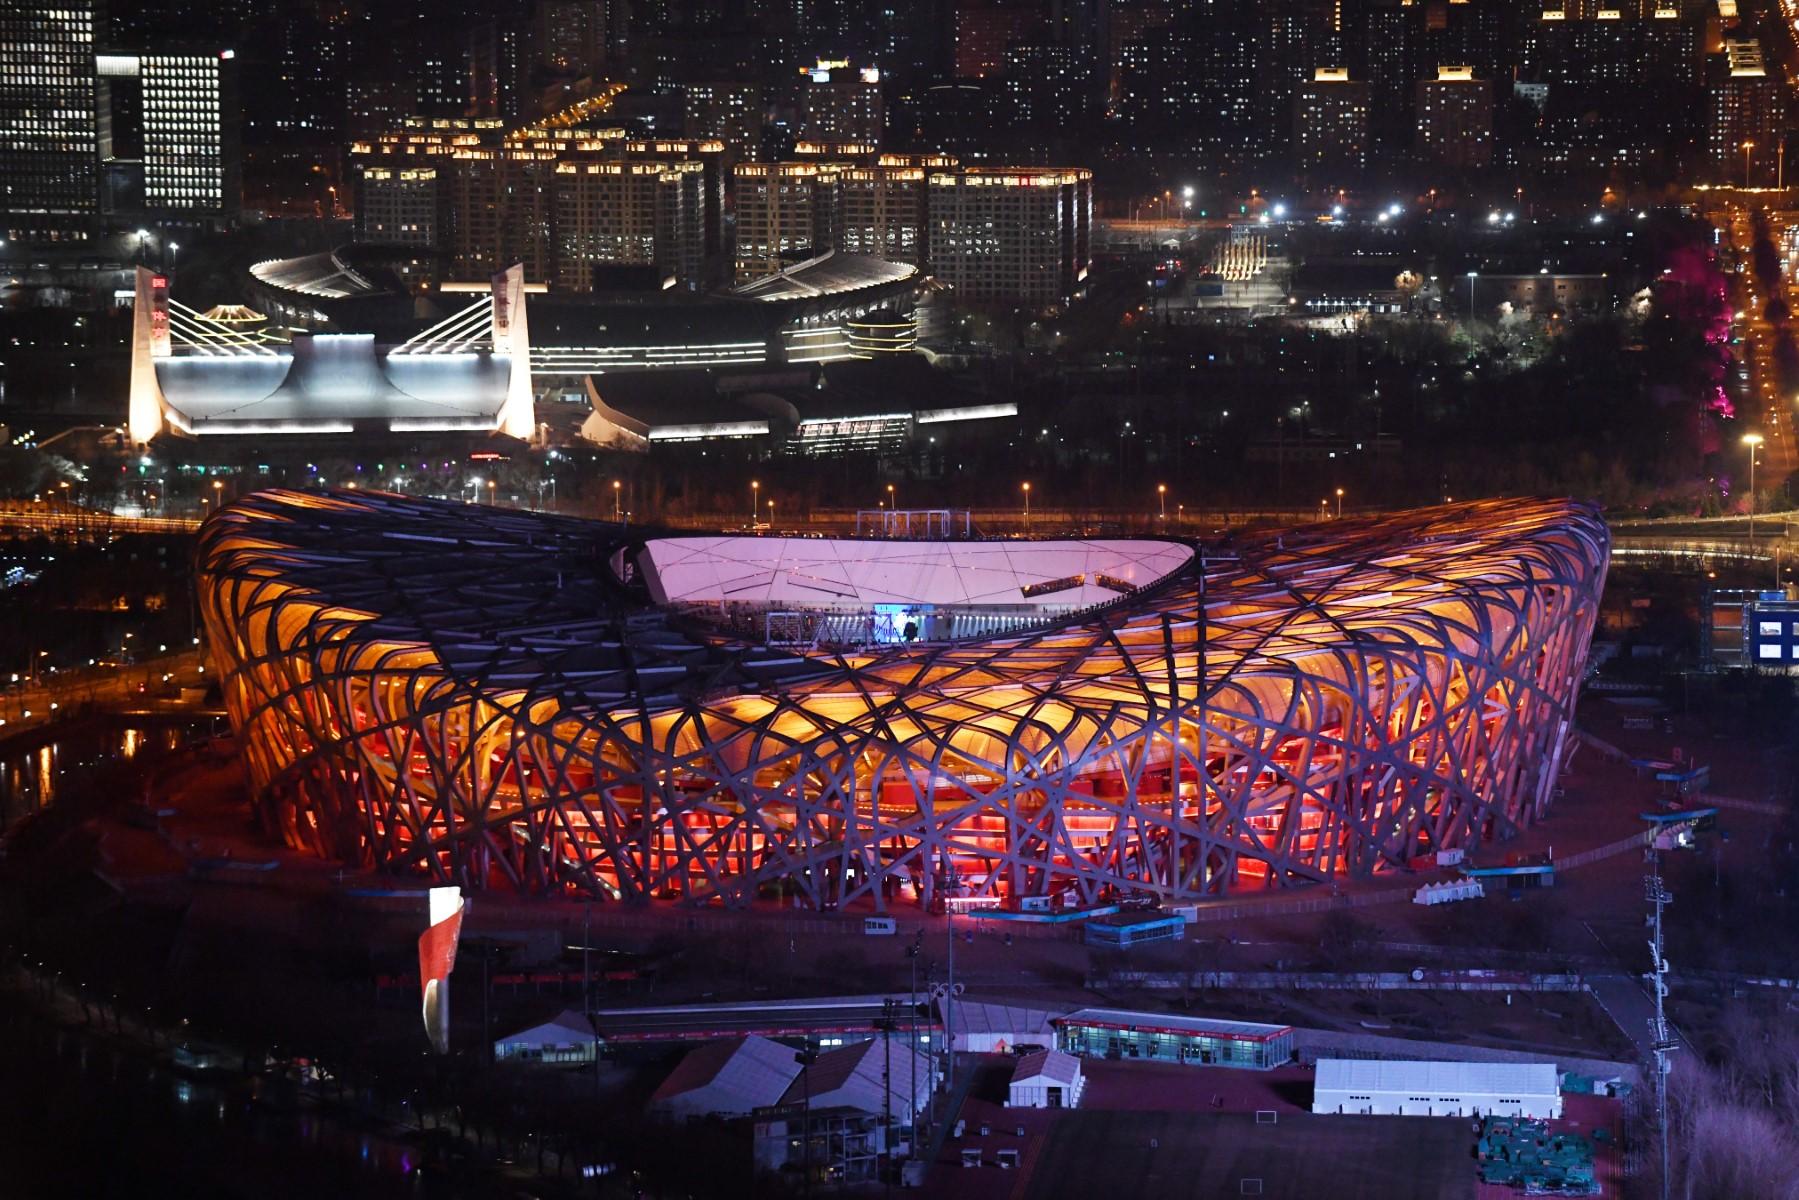 The National Stadium, known as the Bird's Nest, which will be used for opening and closing ceremonies at the 2022 Winter Olympic Games, is seen in Beijing on Jan 3, a month before the opening of the games on Feb 4. Photo: AFP